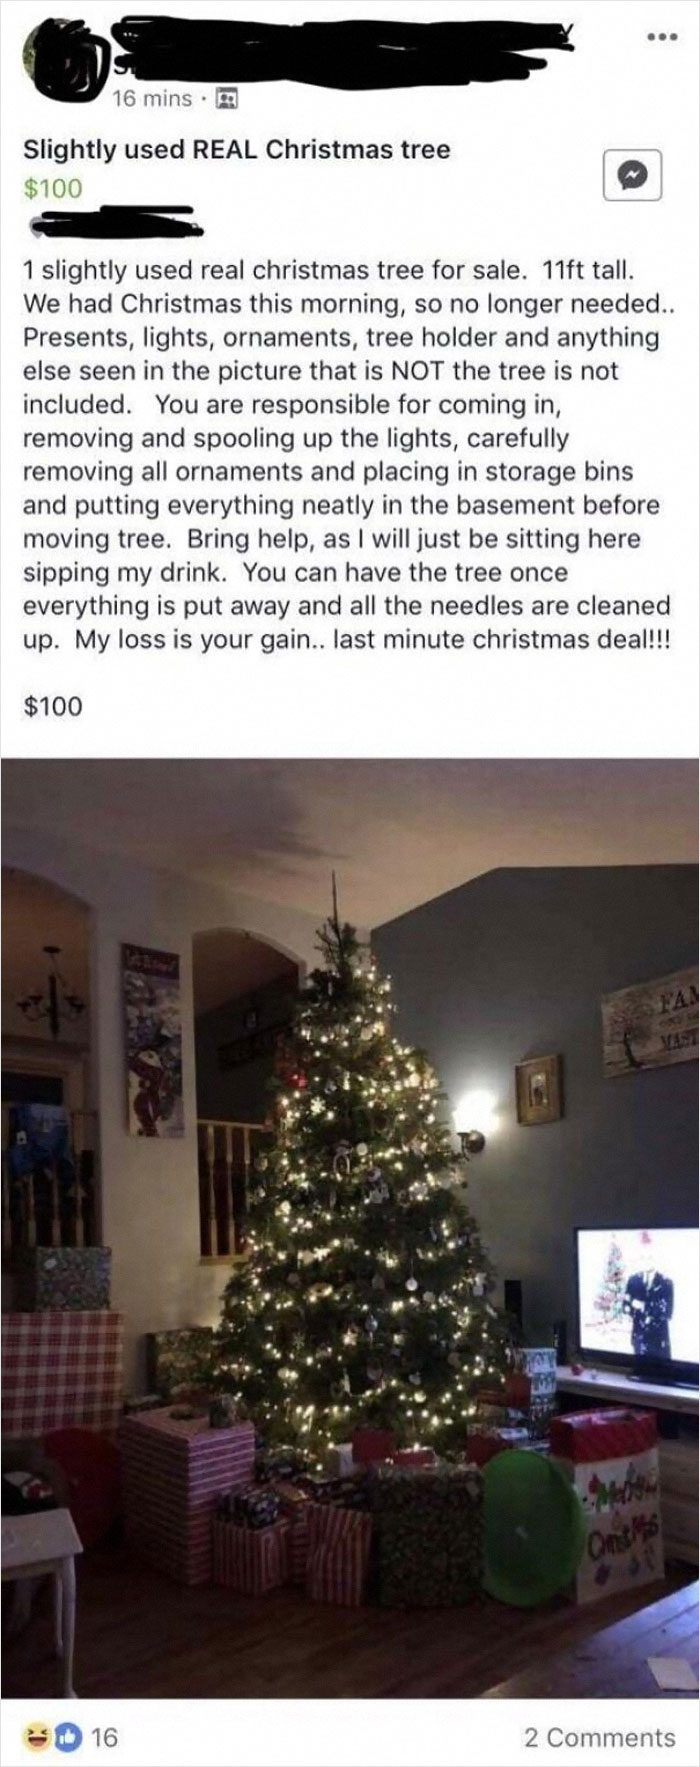 Pay Me $100 And I’ll Let You Take Down My Christmas Tree, Lights, And Ornaments While I Sit There Watching You, Sipping My Drink